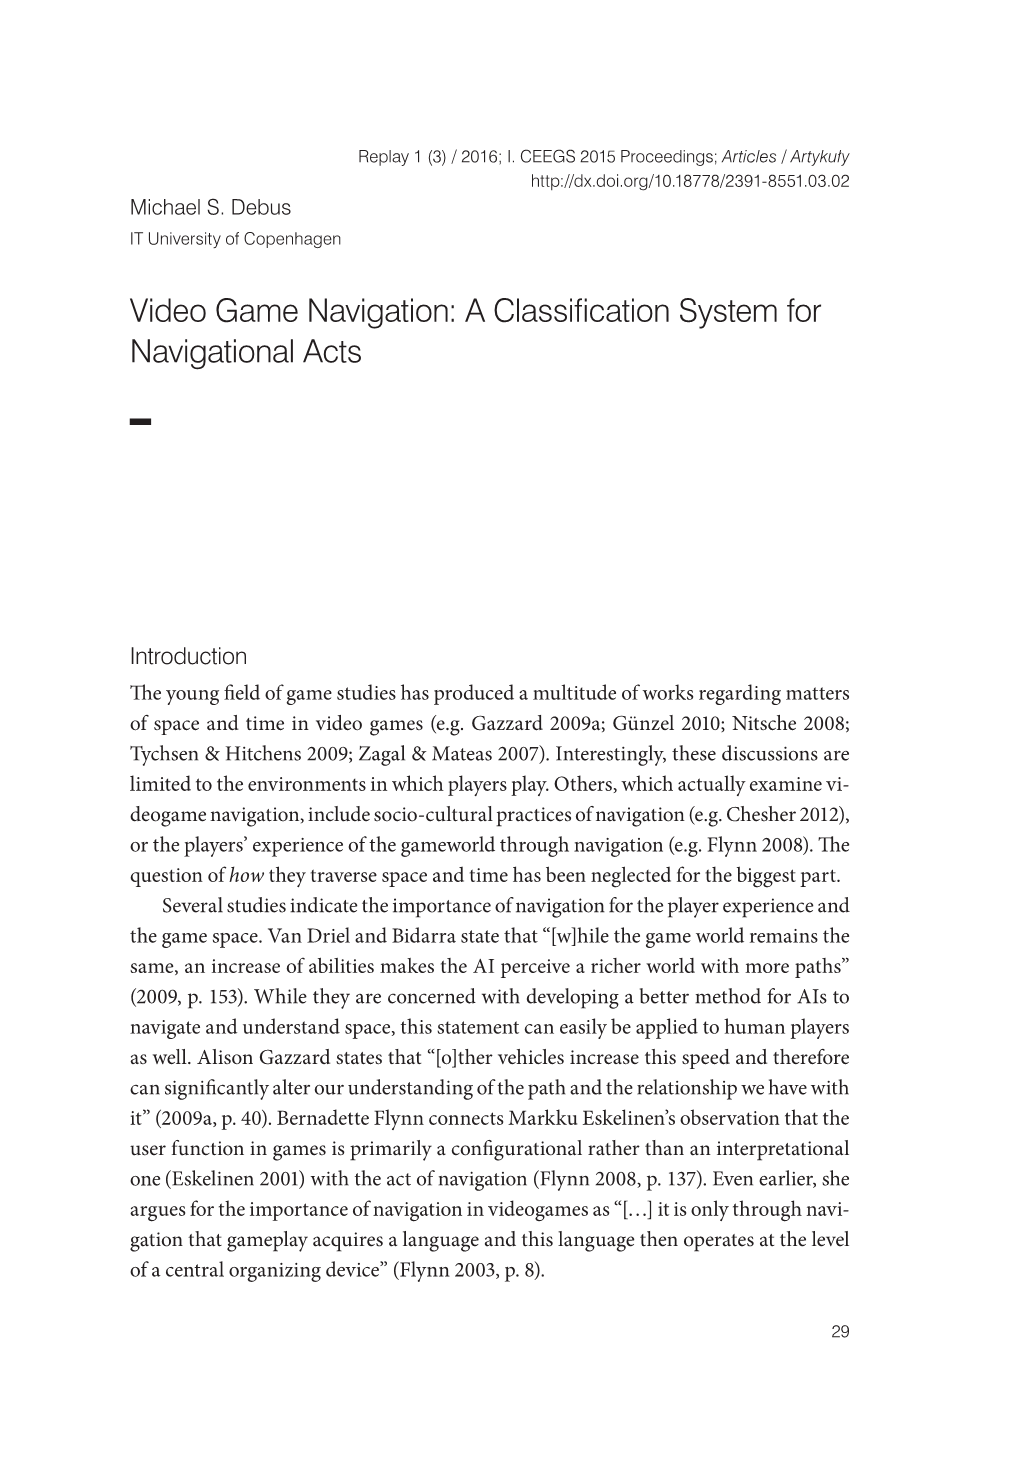 Video Game Navigation: a Classification System for Navigational Acts